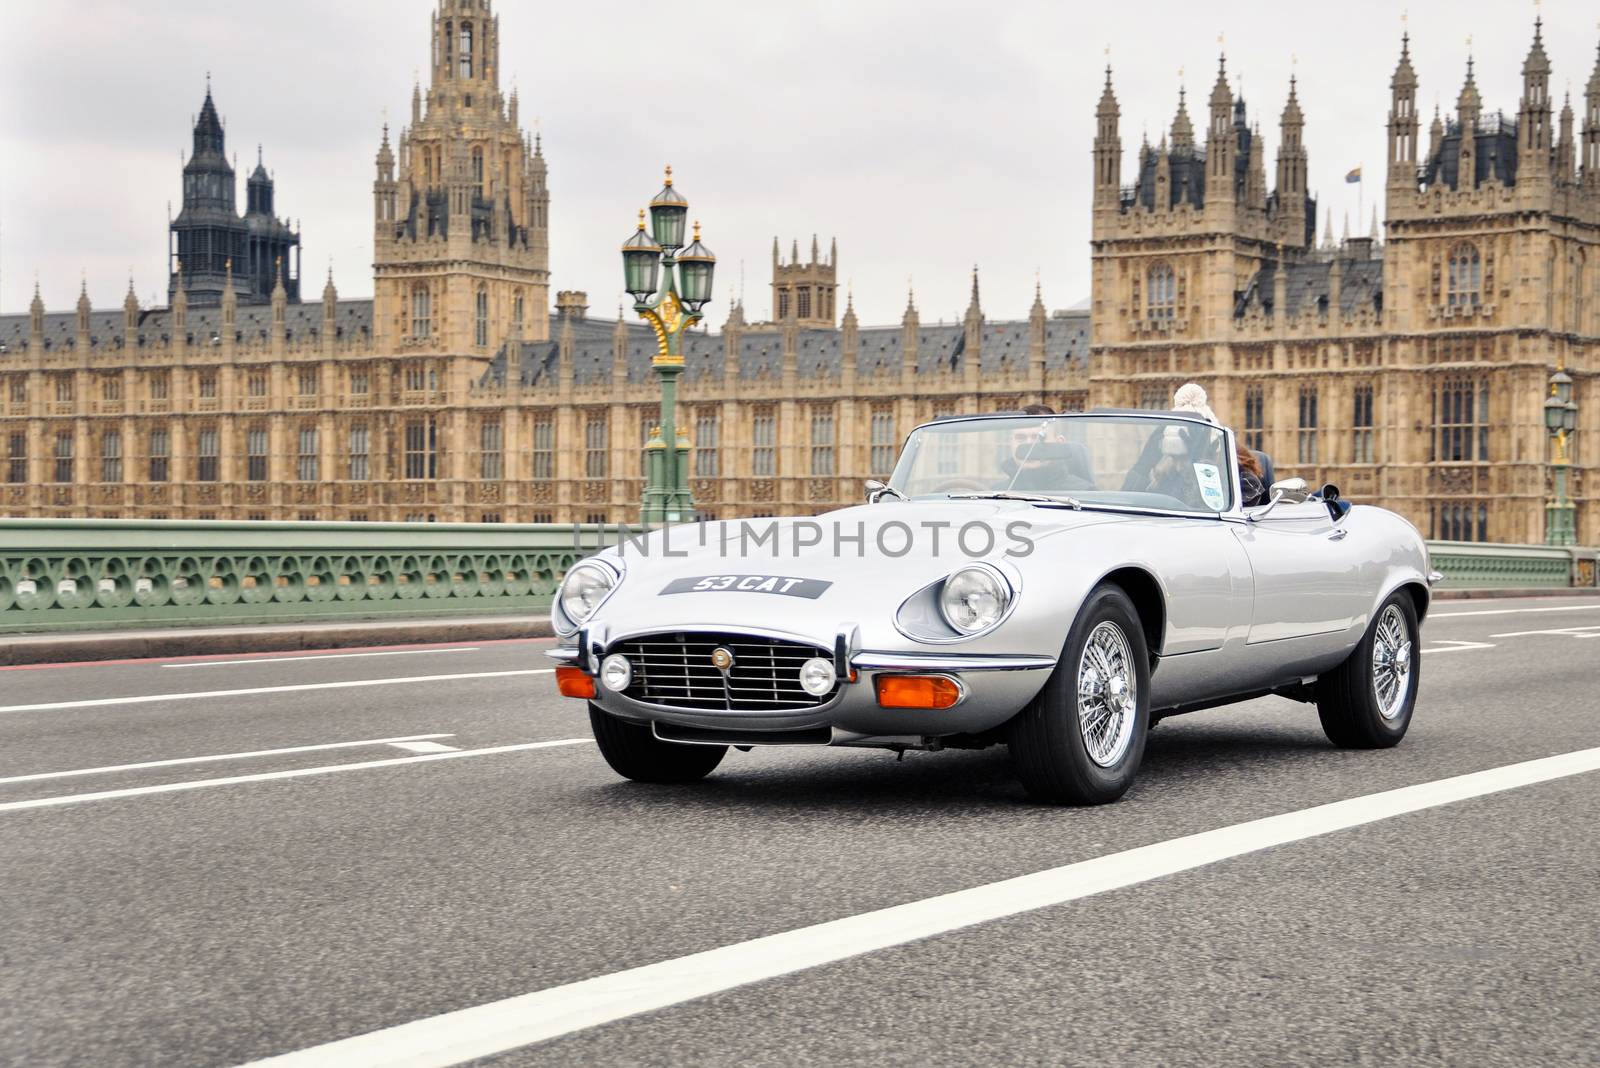 LONDON, UK - CIRCA NOVEMBER 2011: A silver Jaguar E-Type on Westminster Bridge with the Palace of Westminster in the background.